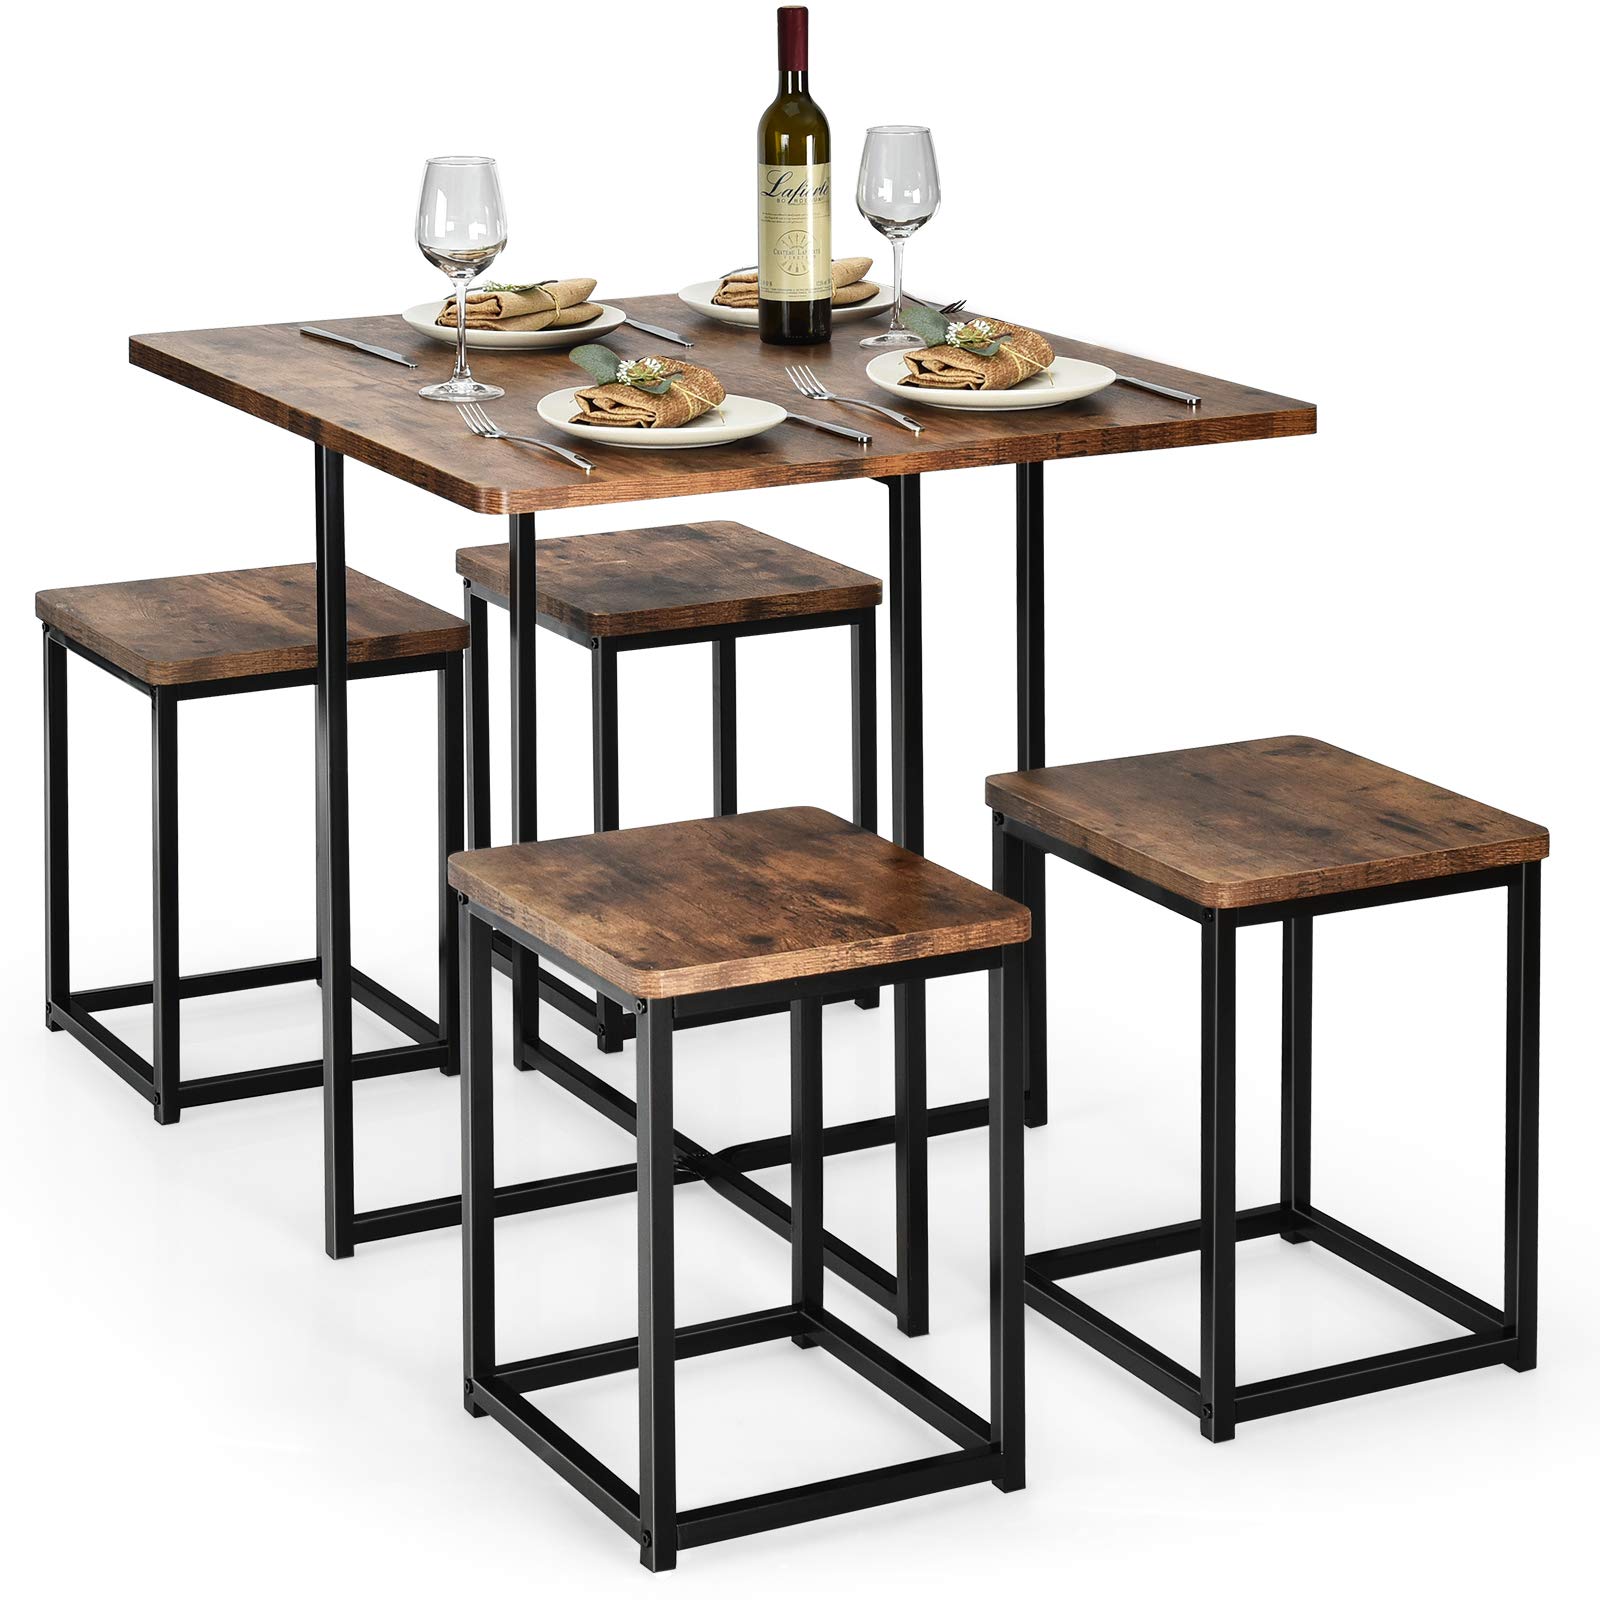 Giantex 5 Piece Dining Table Set, Dining Set for 4 with Square Stools, Small Kitchen Table Set with Metal Frame, Compact Design for Small Space, Home Kitchen Bar Pub Apartment